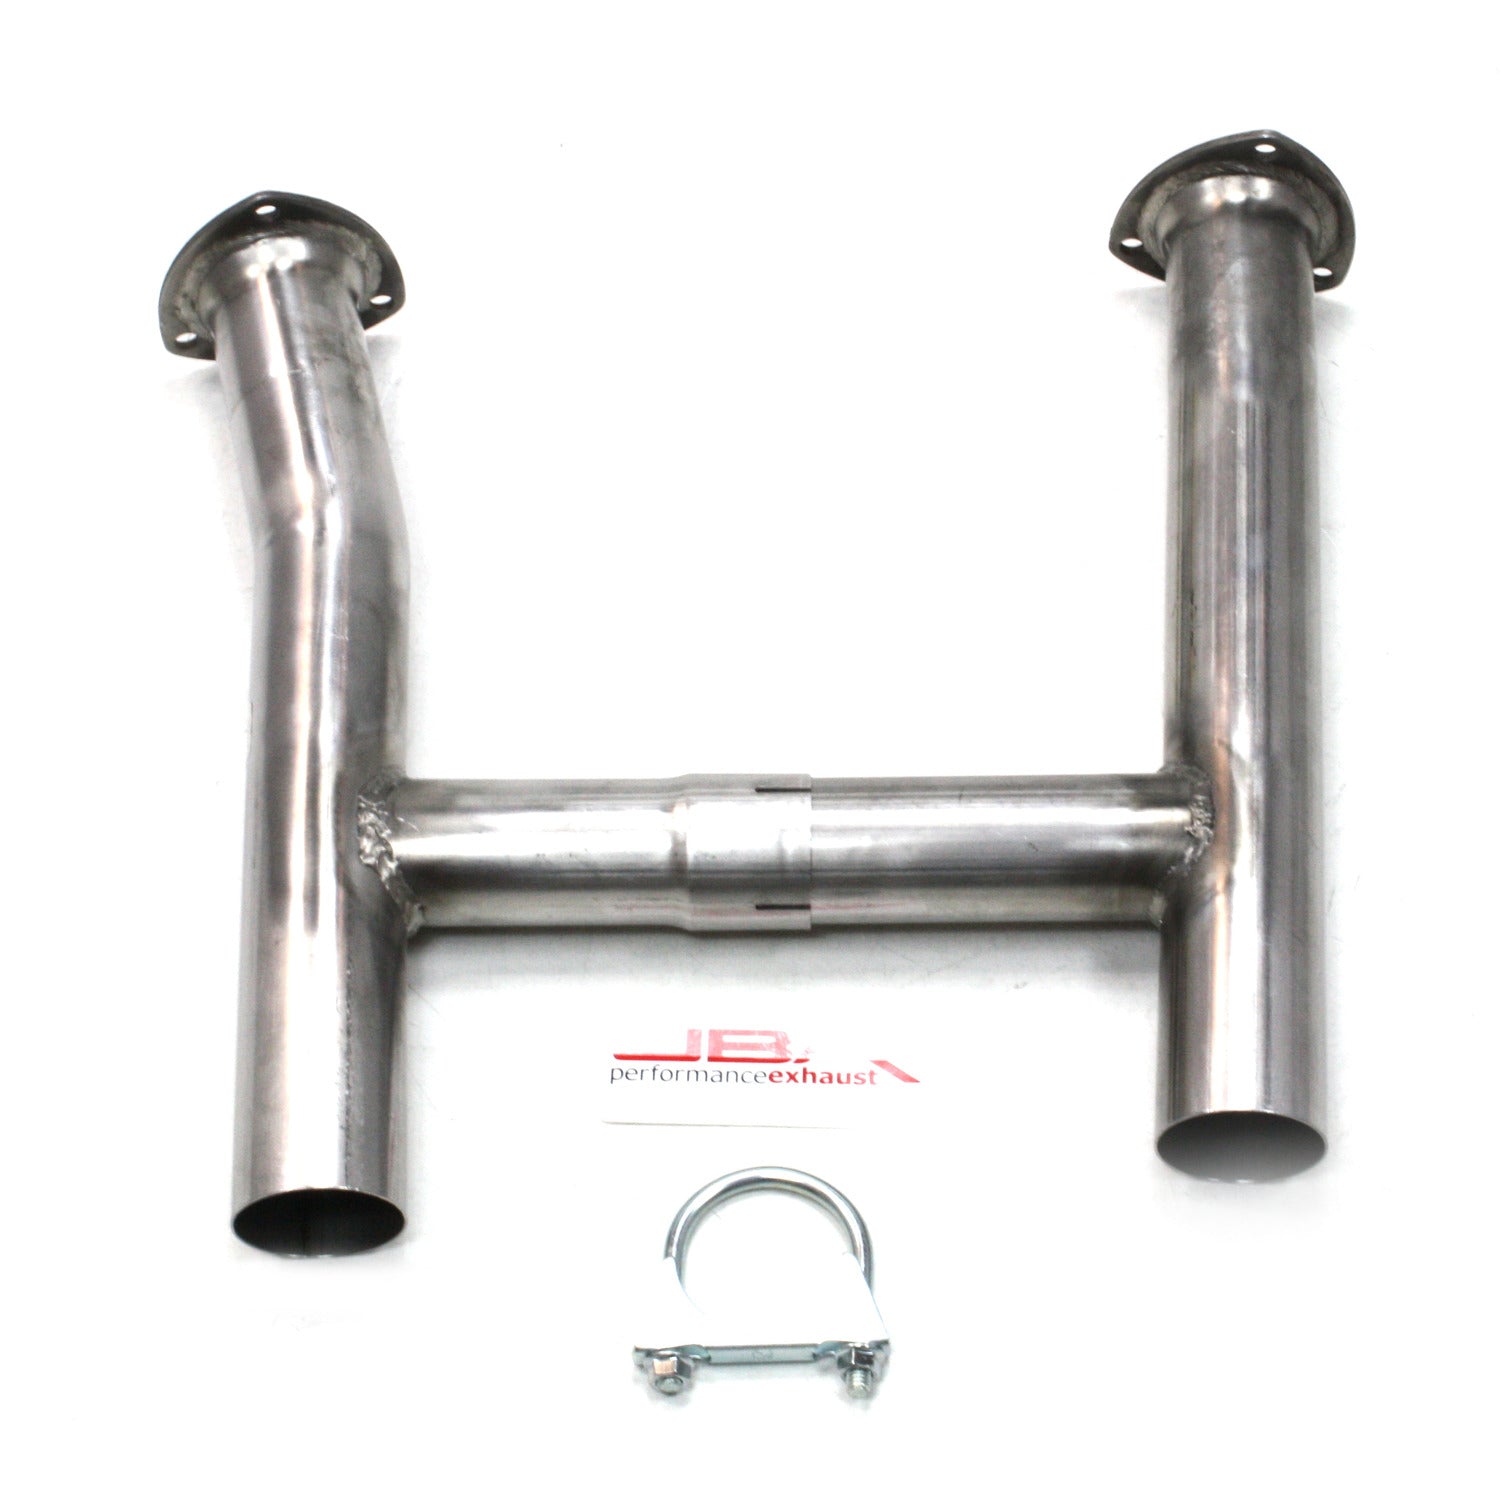 JBA Performance Exhaust 6613SH 2.5 "Stainless Steel Mid-Pipe 65-73 Mustang GT H-Pipe for use with 6613S Long Tube Headers